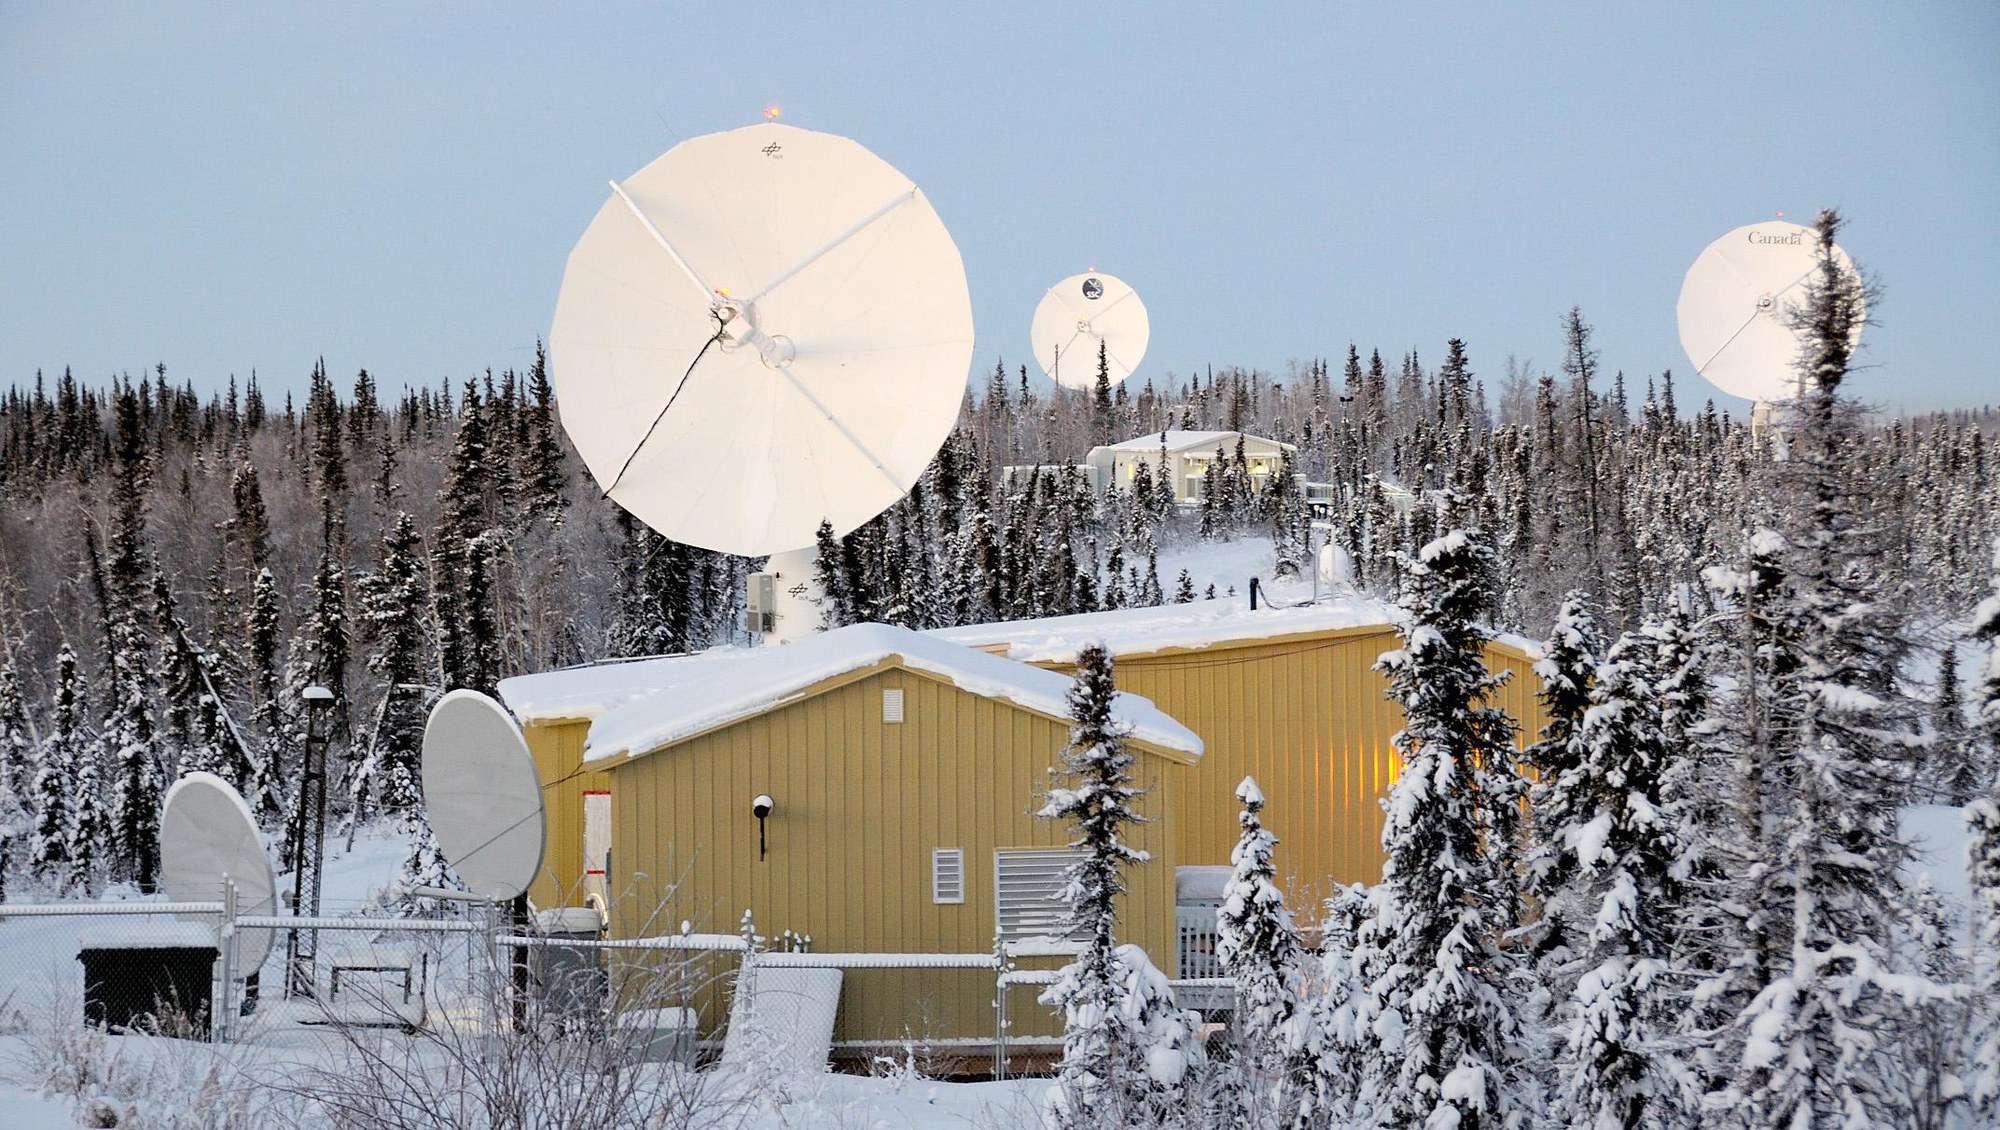 International Satellite Station Facility (ISSF) of the Earth Observation Center in Inuvik, Kanada